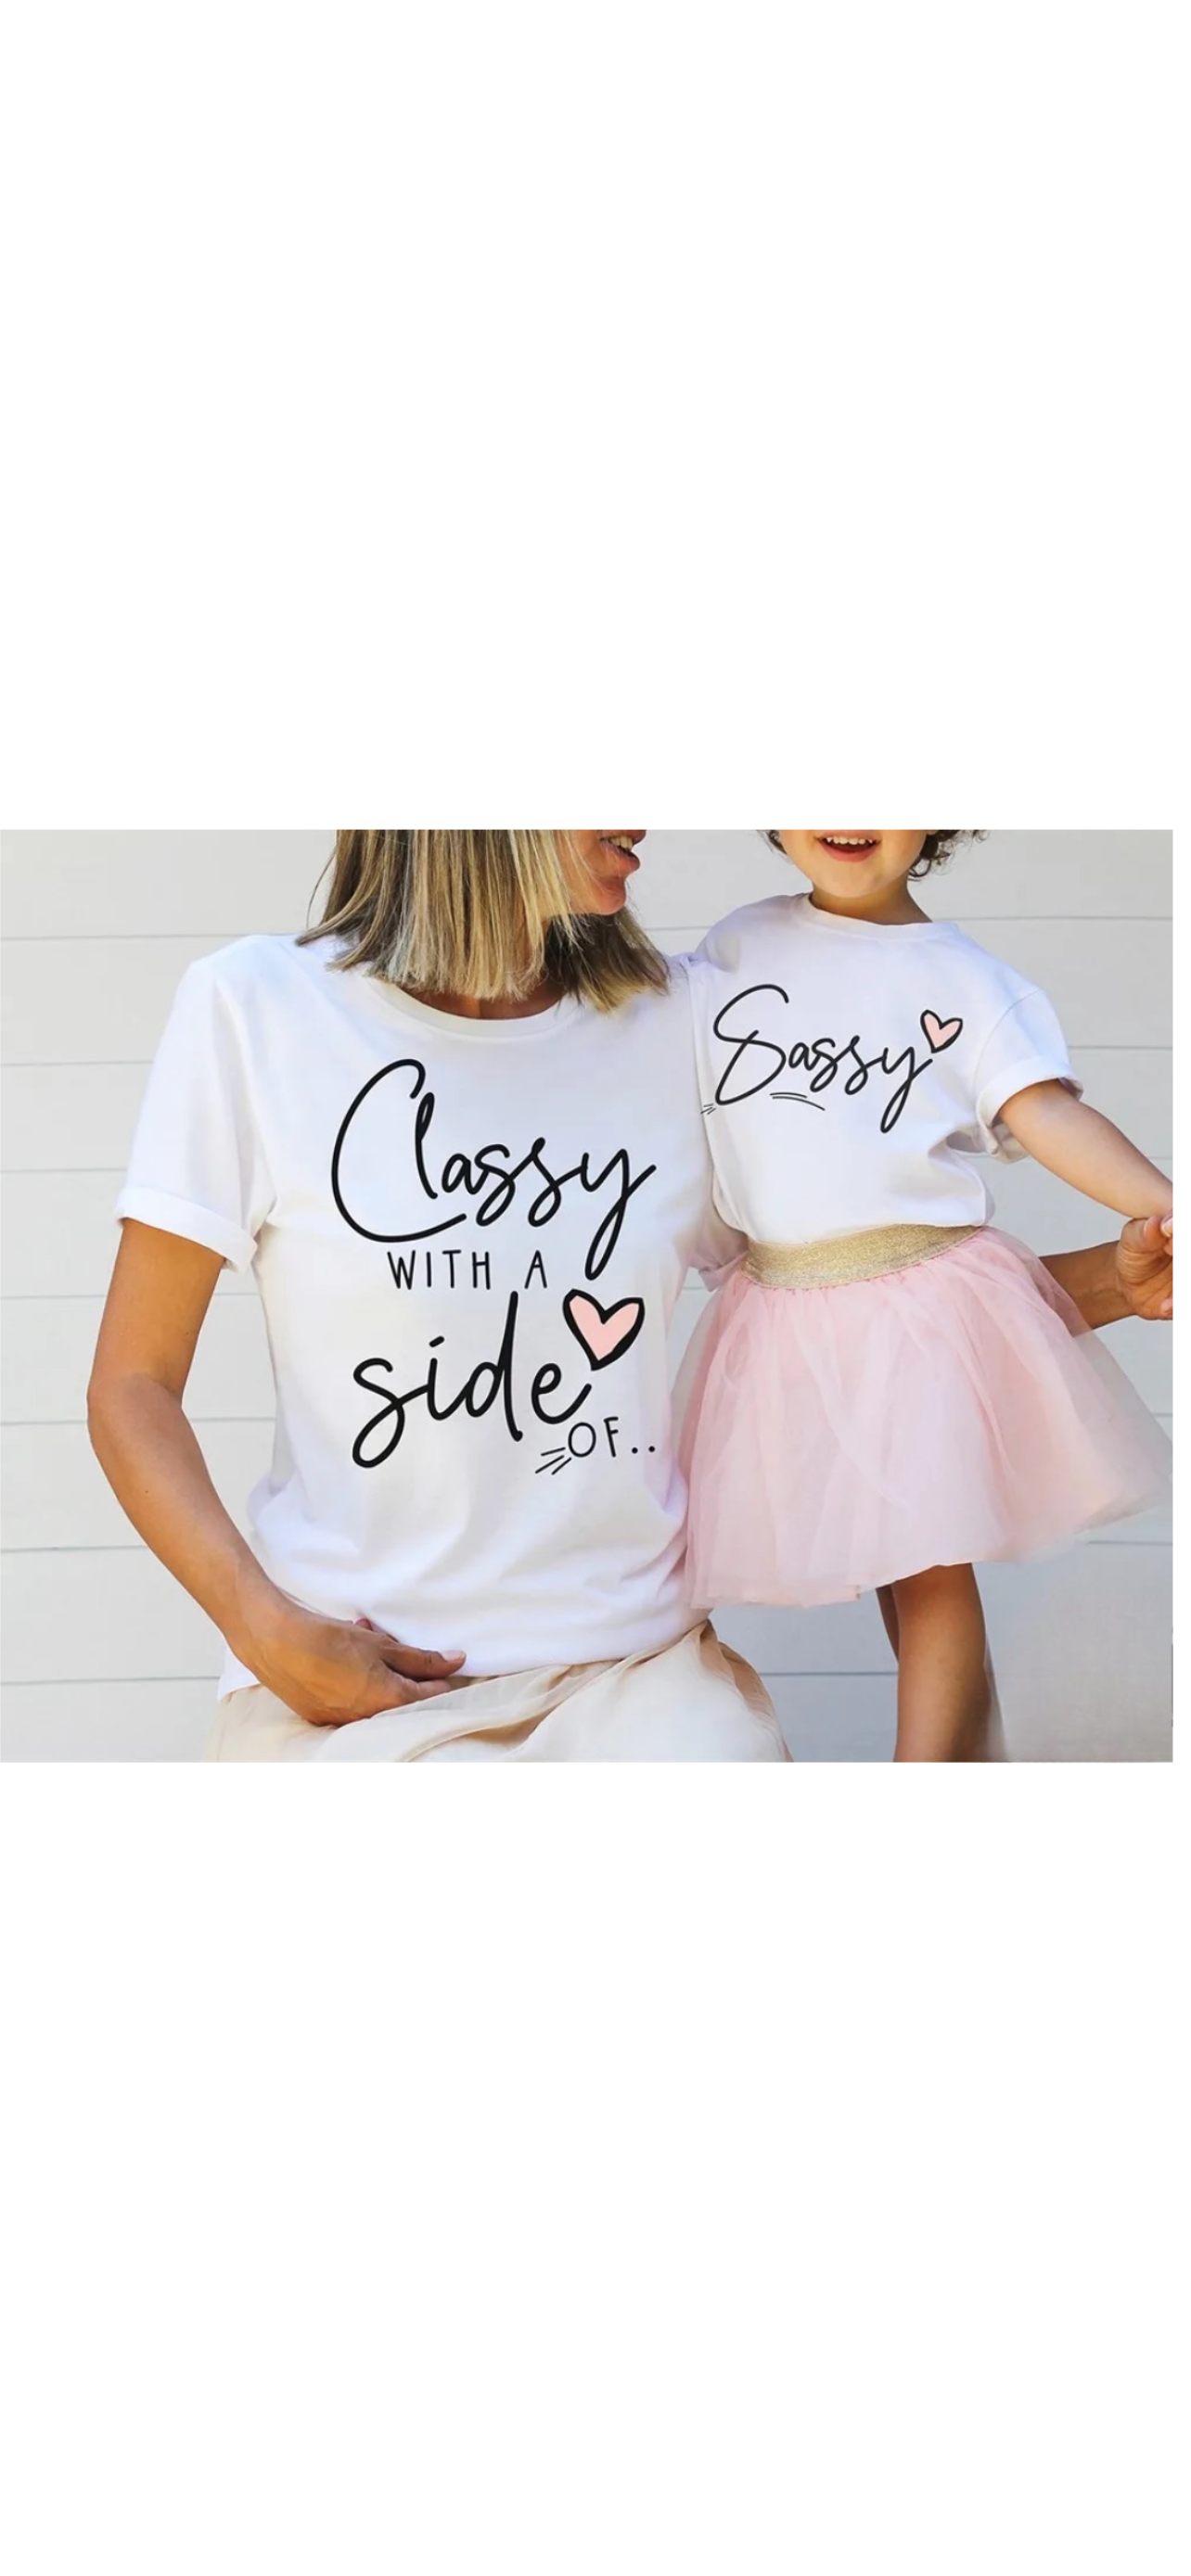 Classy with a side of Sassy matching mommy and me shirt| Classy sassy mom and me shirts